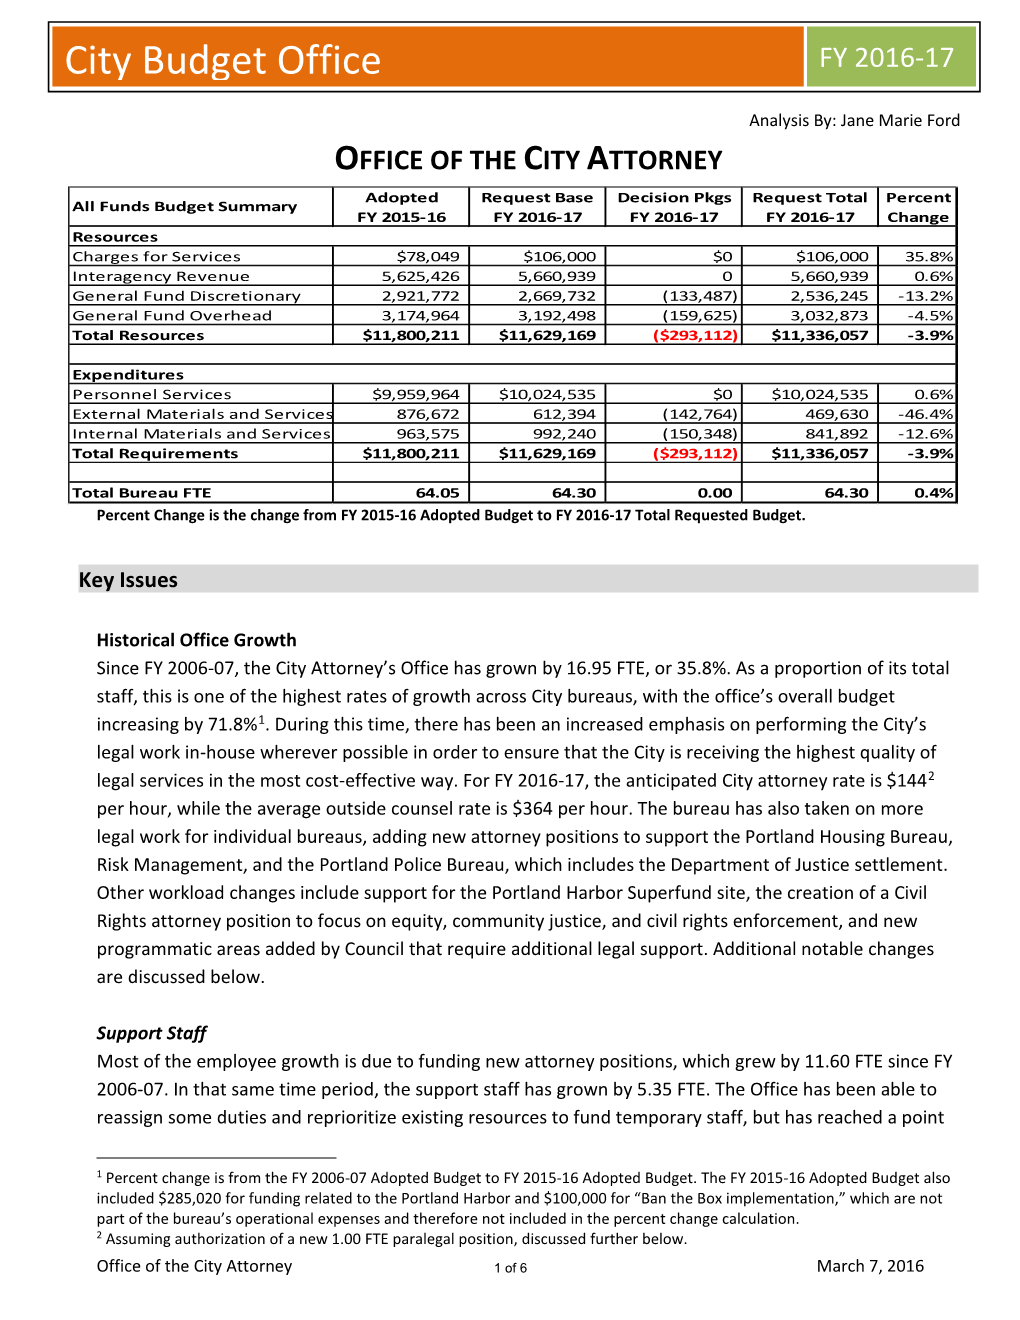 City Budget Office FY 2016-17